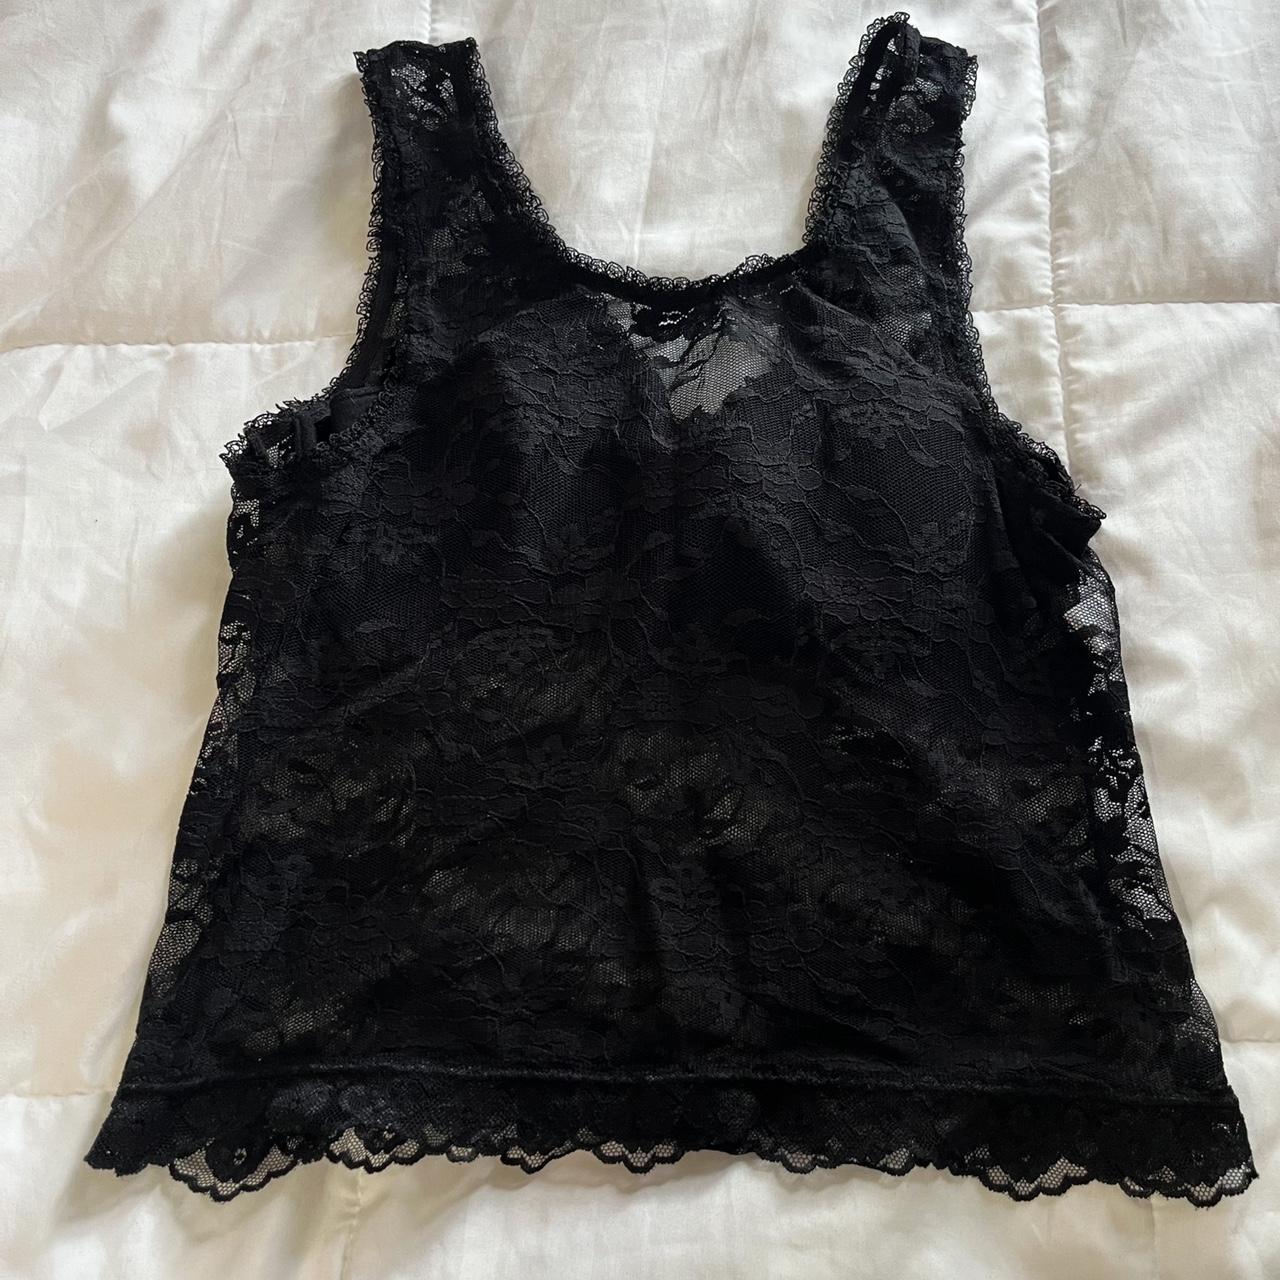 new without tags 🏷 black sheer lace cami bustier bra... - Depop